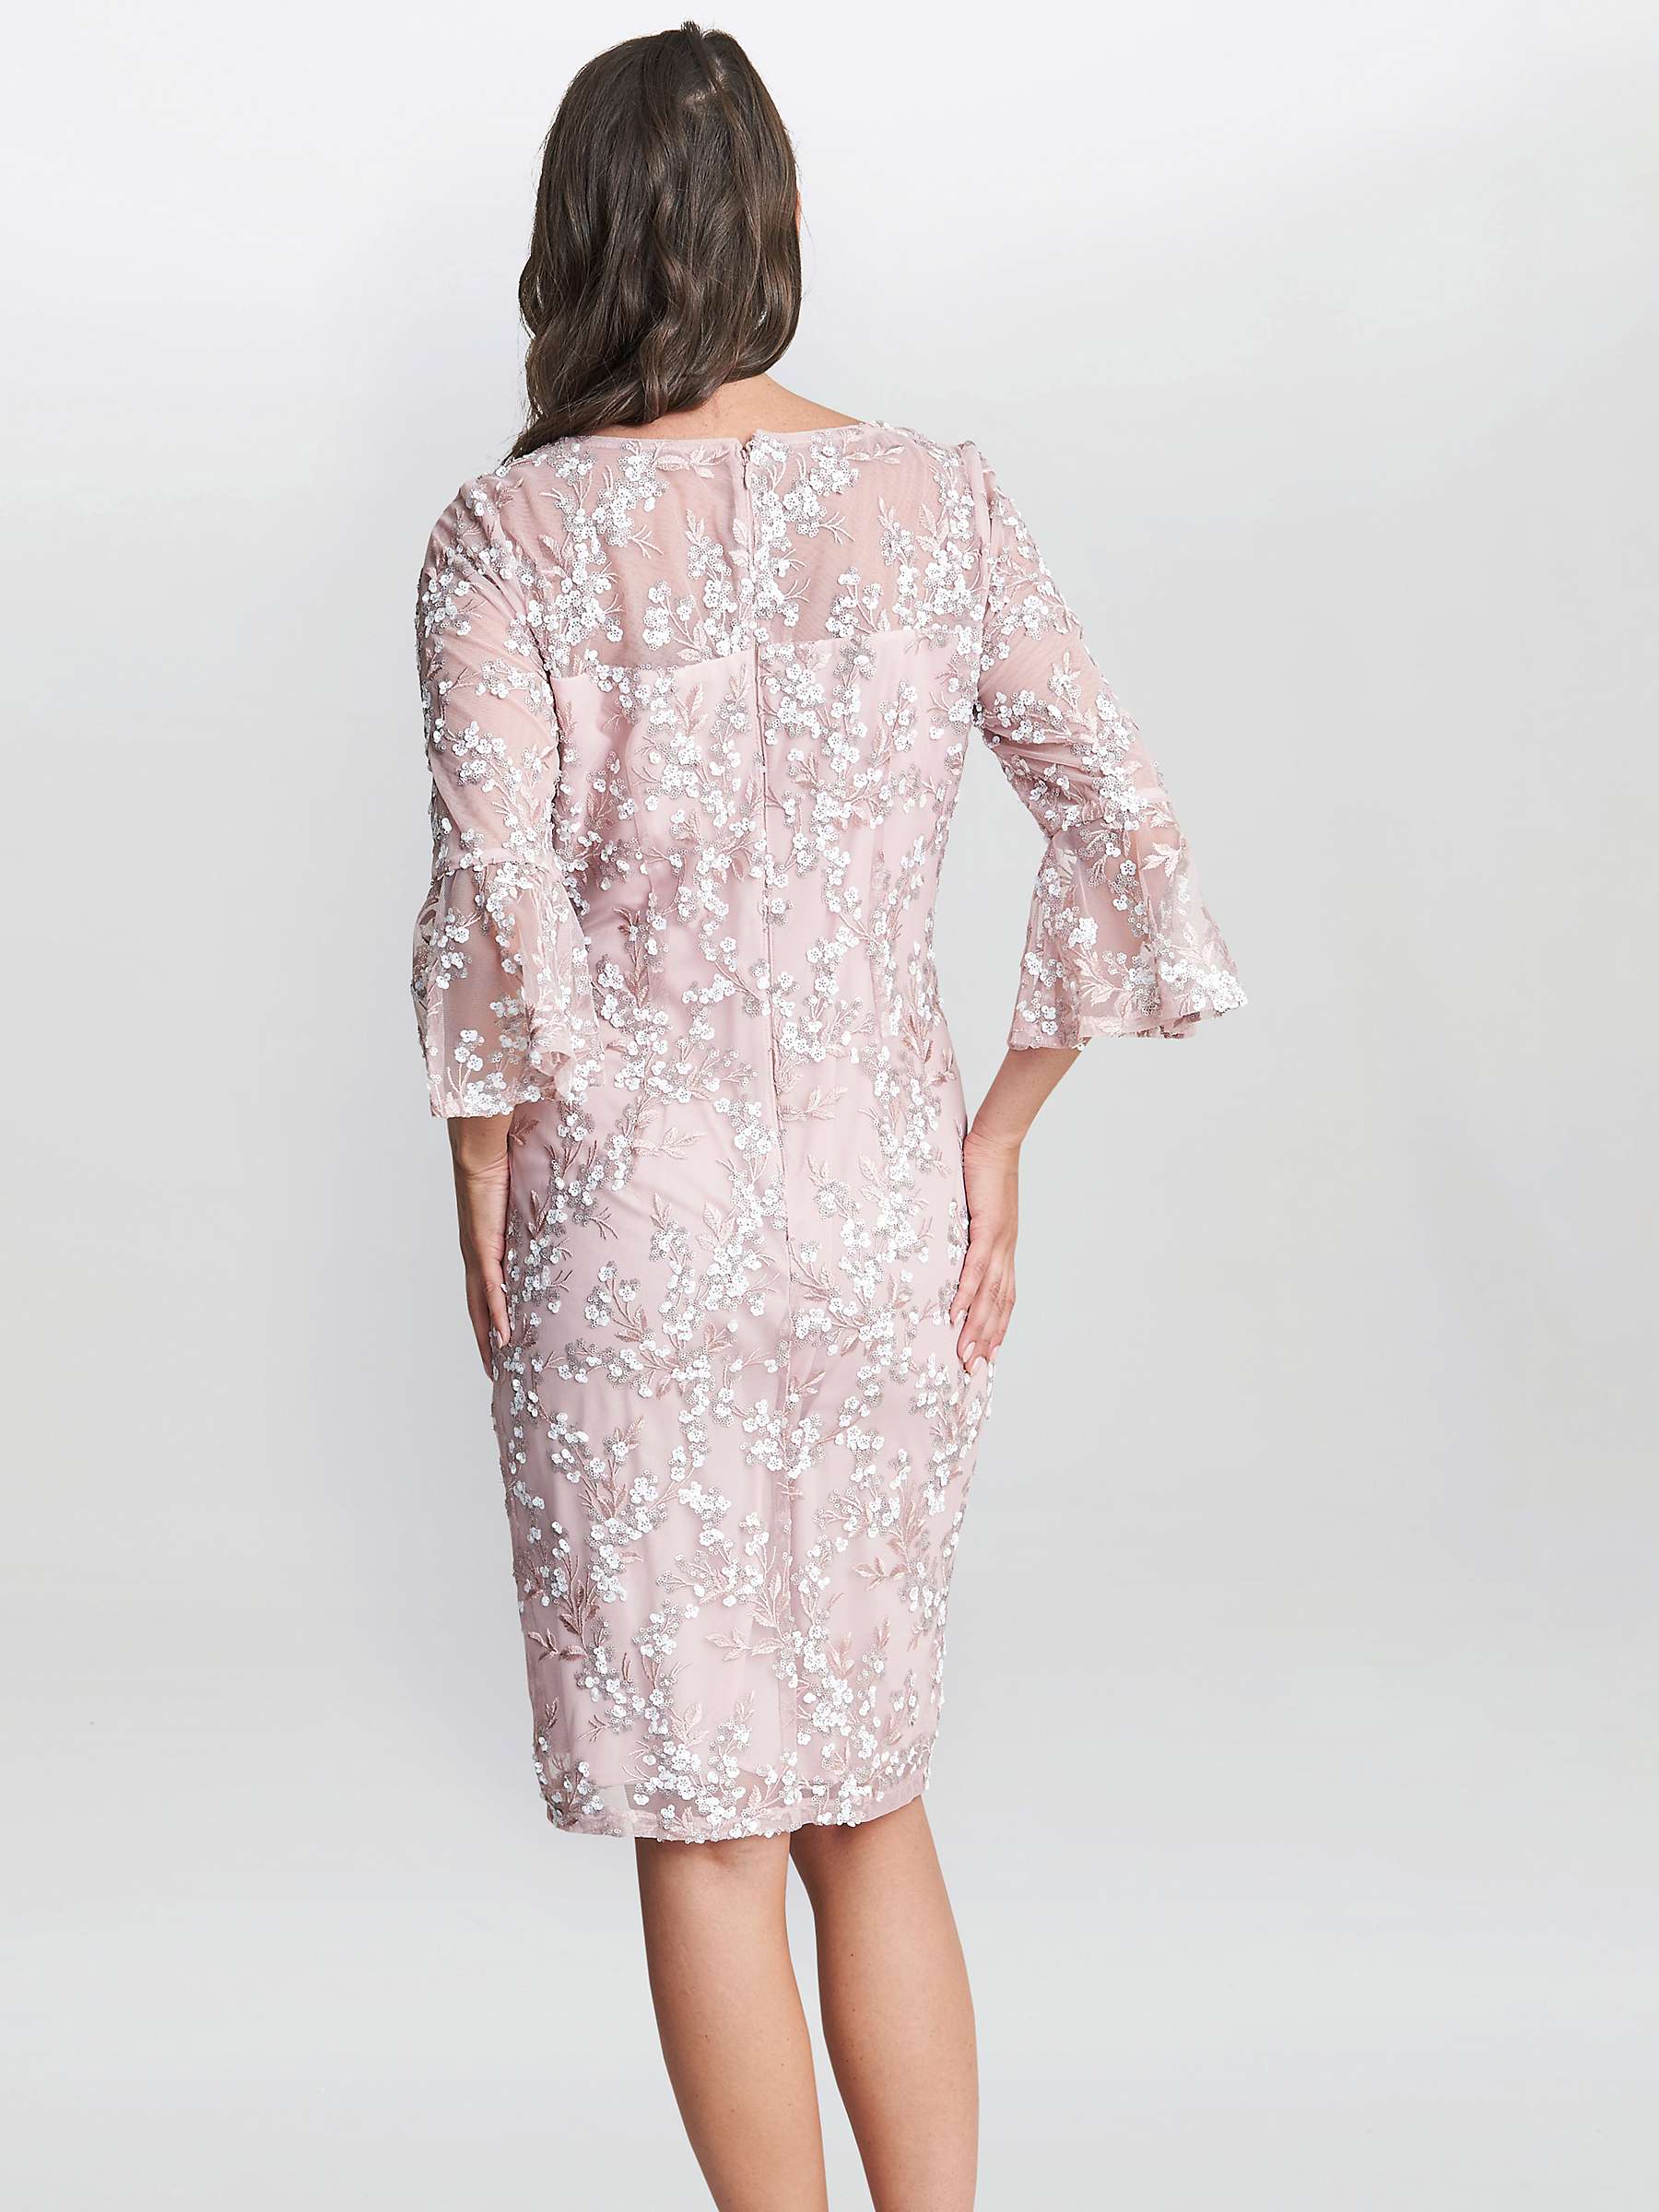 Buy Gina Bacconi Tanya Embroidered Sequin Dress, Shell Online at johnlewis.com